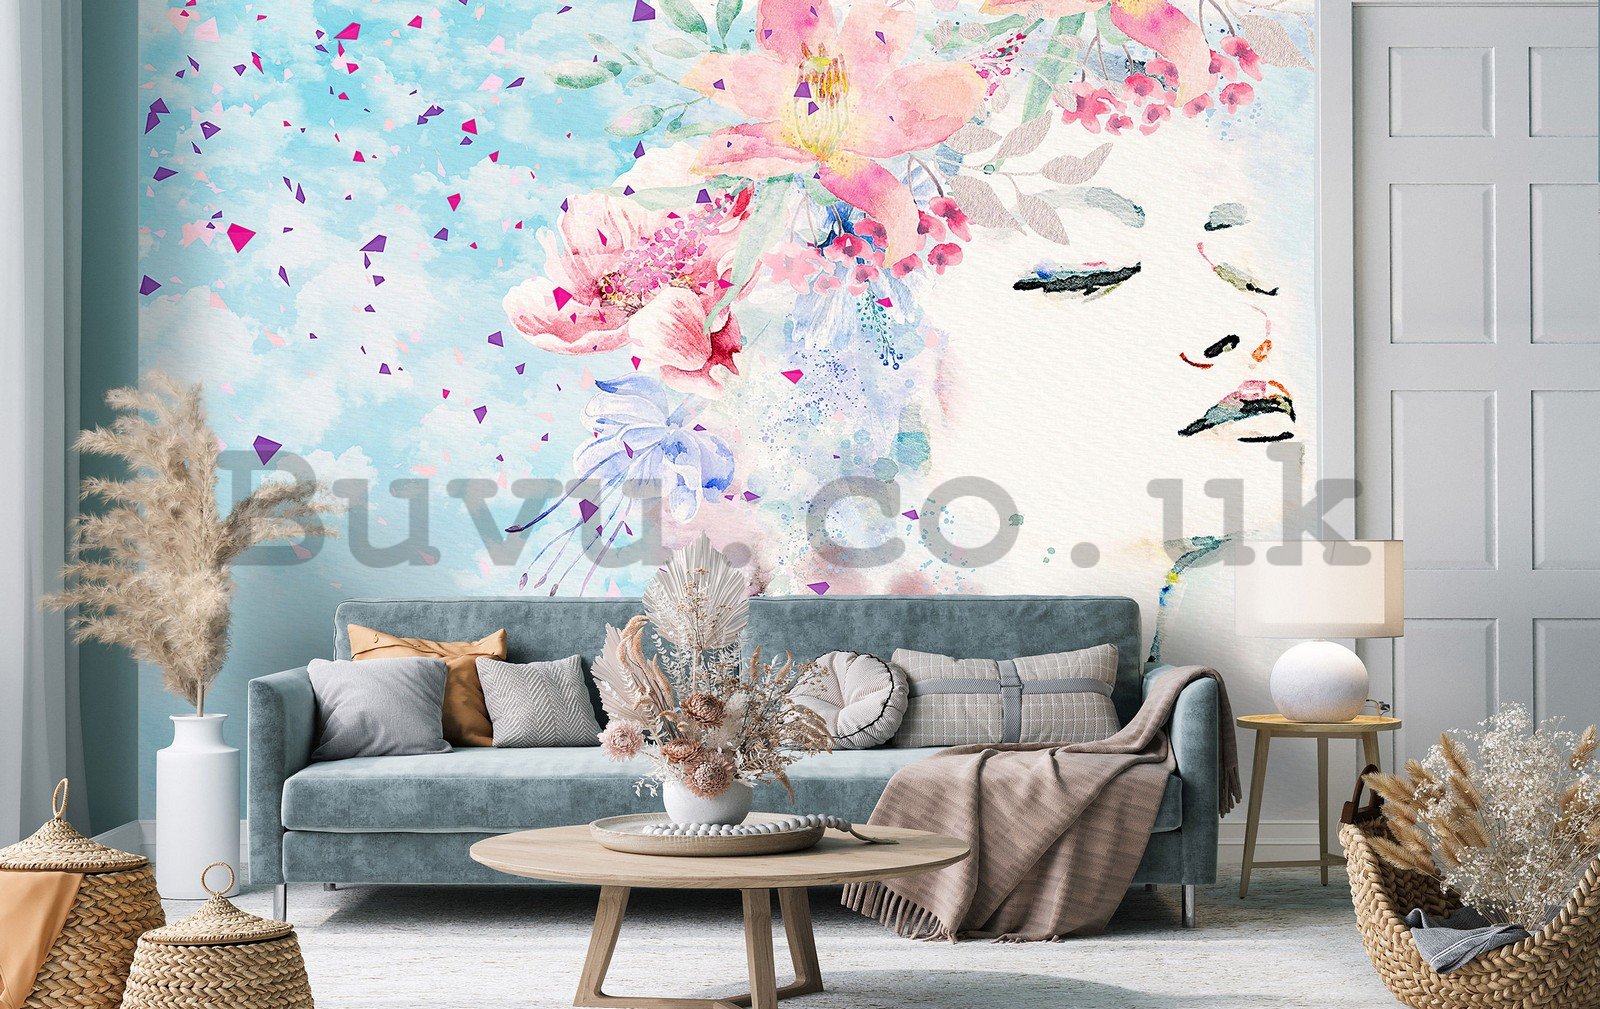 Wall mural vlies: Woman with flowers - 254x184 cm